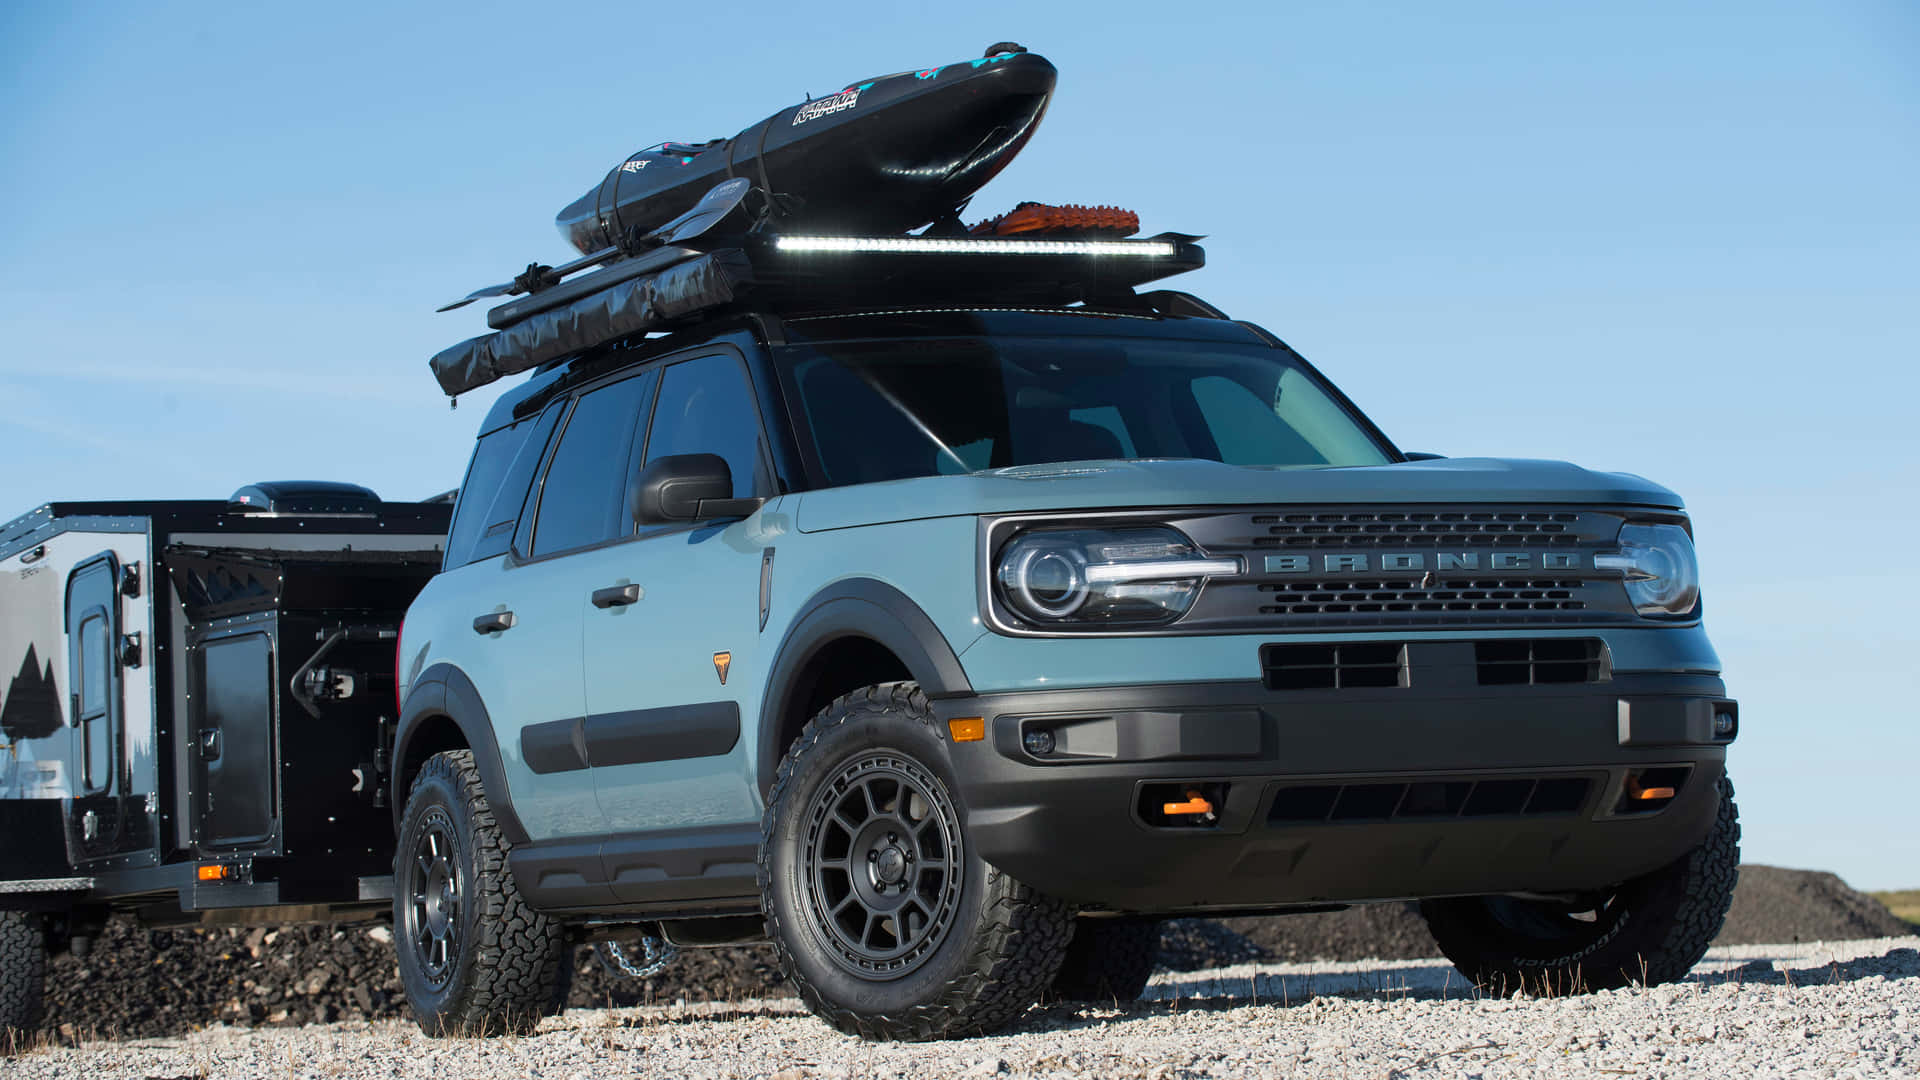 Rugged Adventure Awaits You in the Ford Bronco